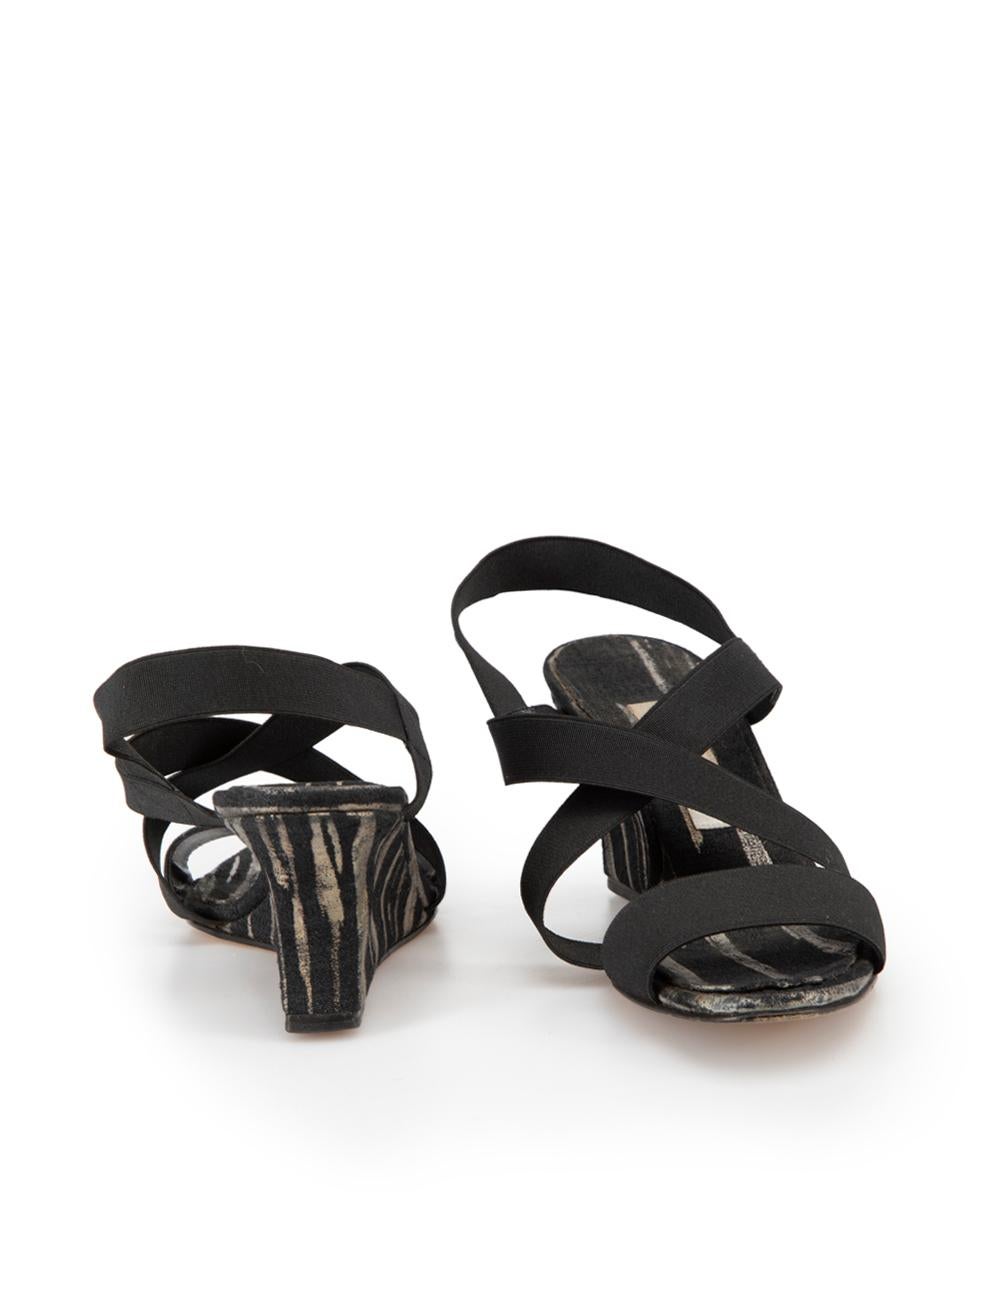 Manolo Blahnik Black Patterned Strap Wedge Sandals Size IT 35.5 In Good Condition For Sale In London, GB